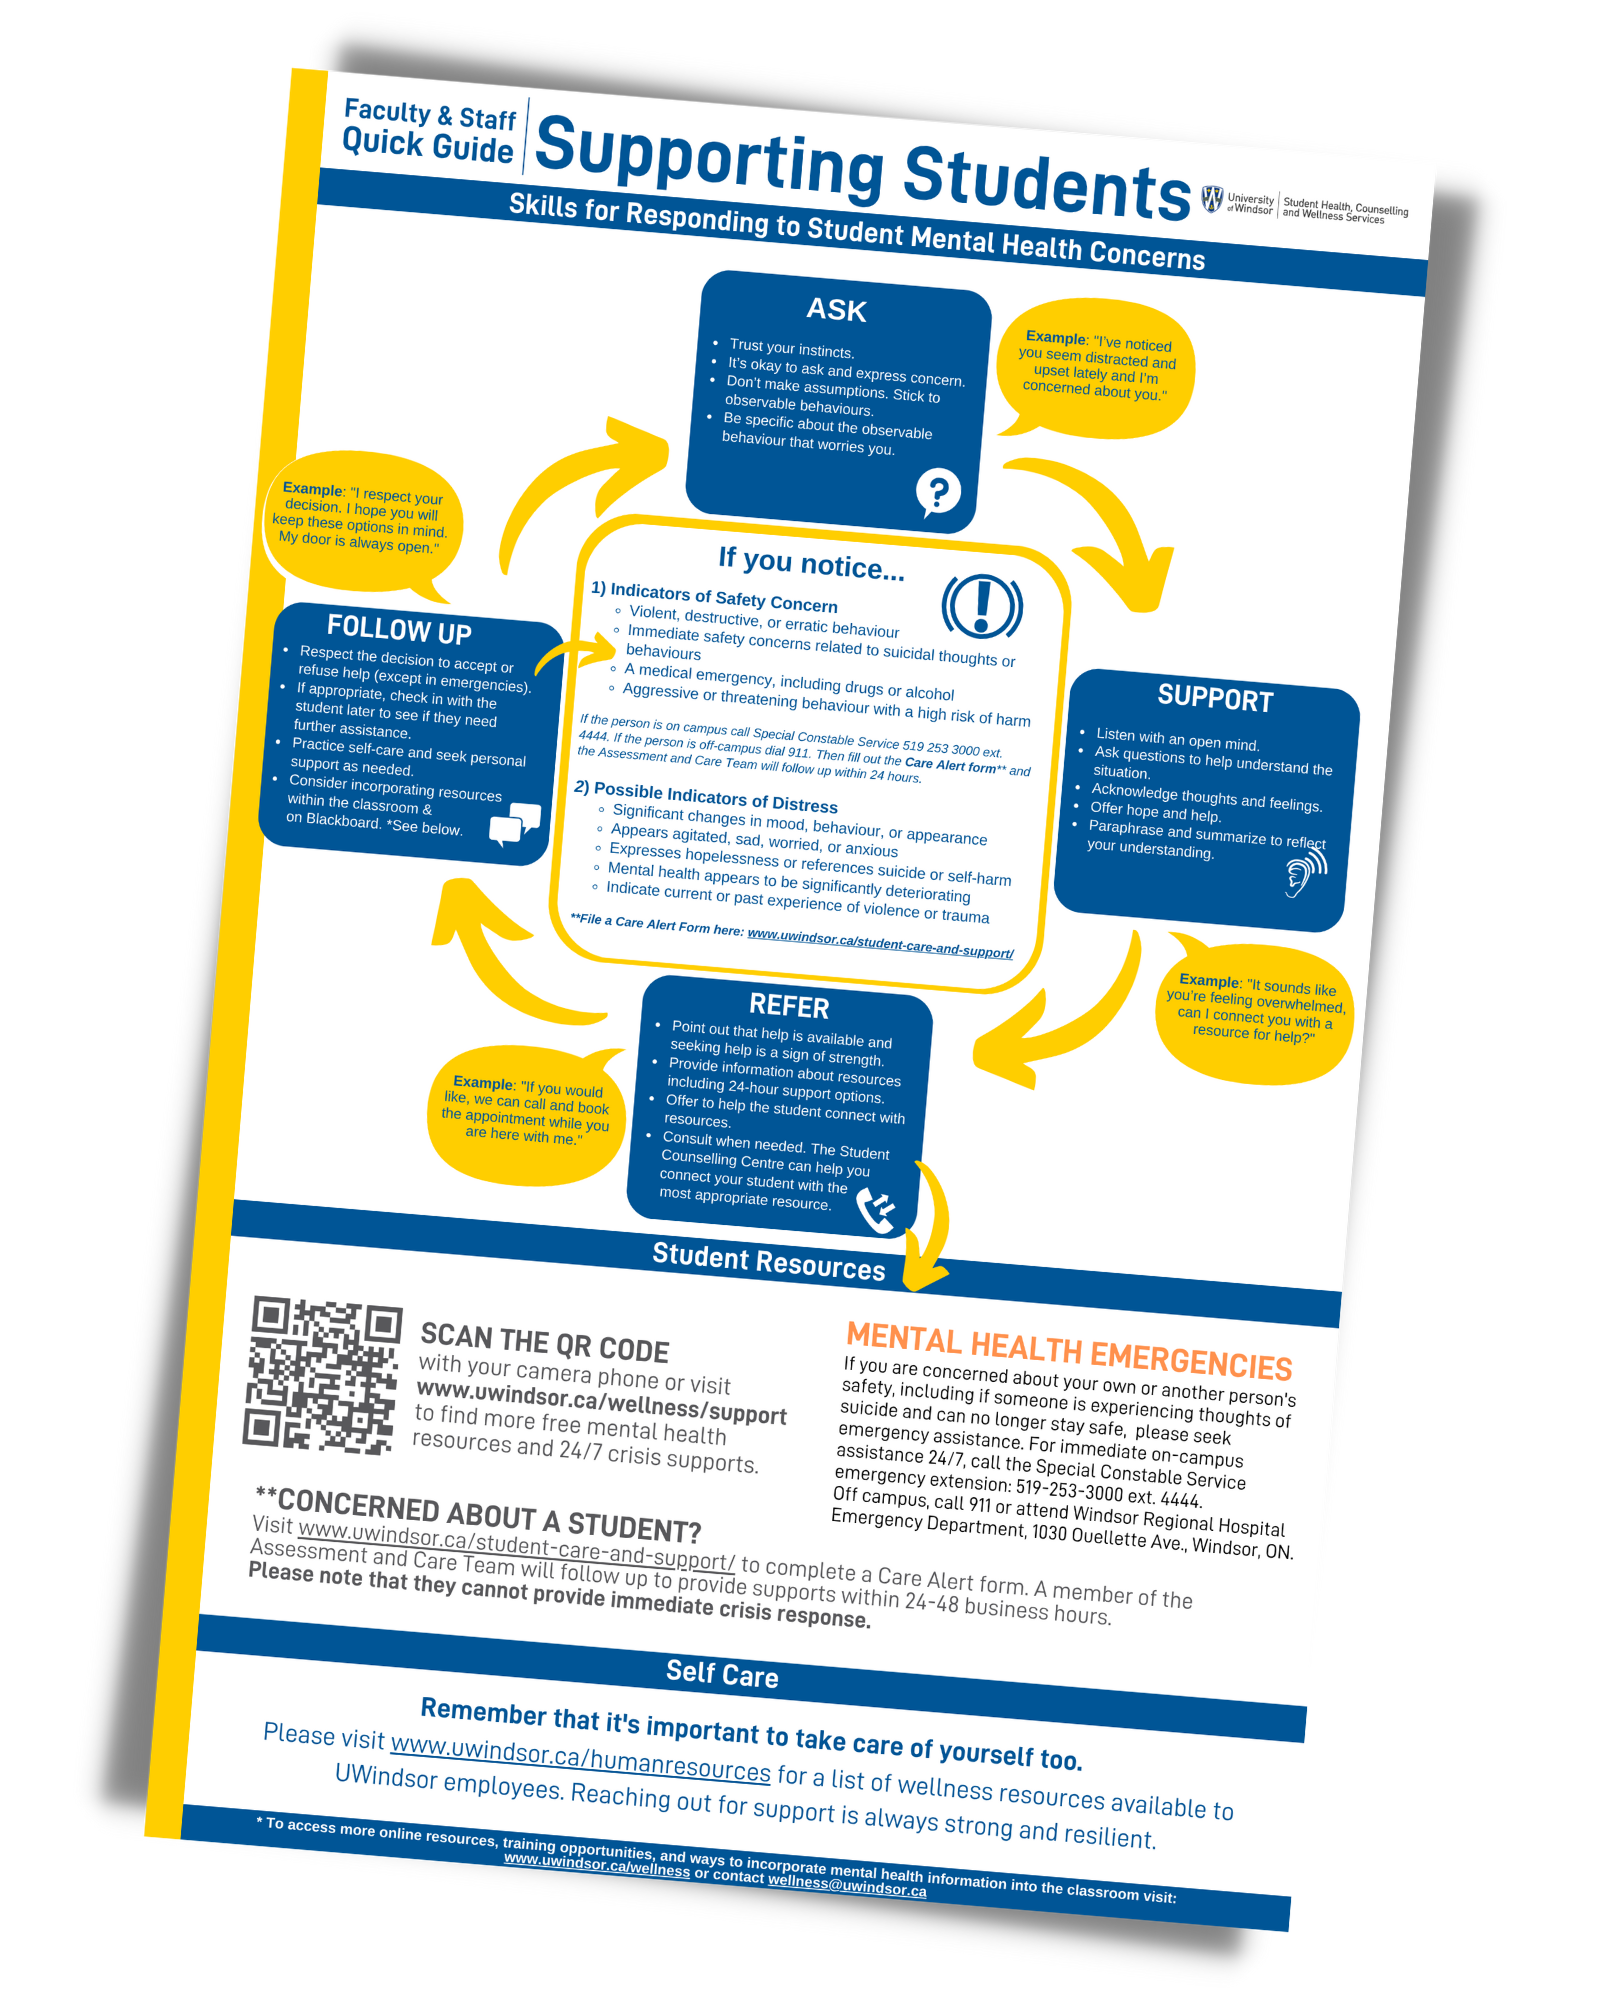 Faculty & Staff quick guide: supporting students poster